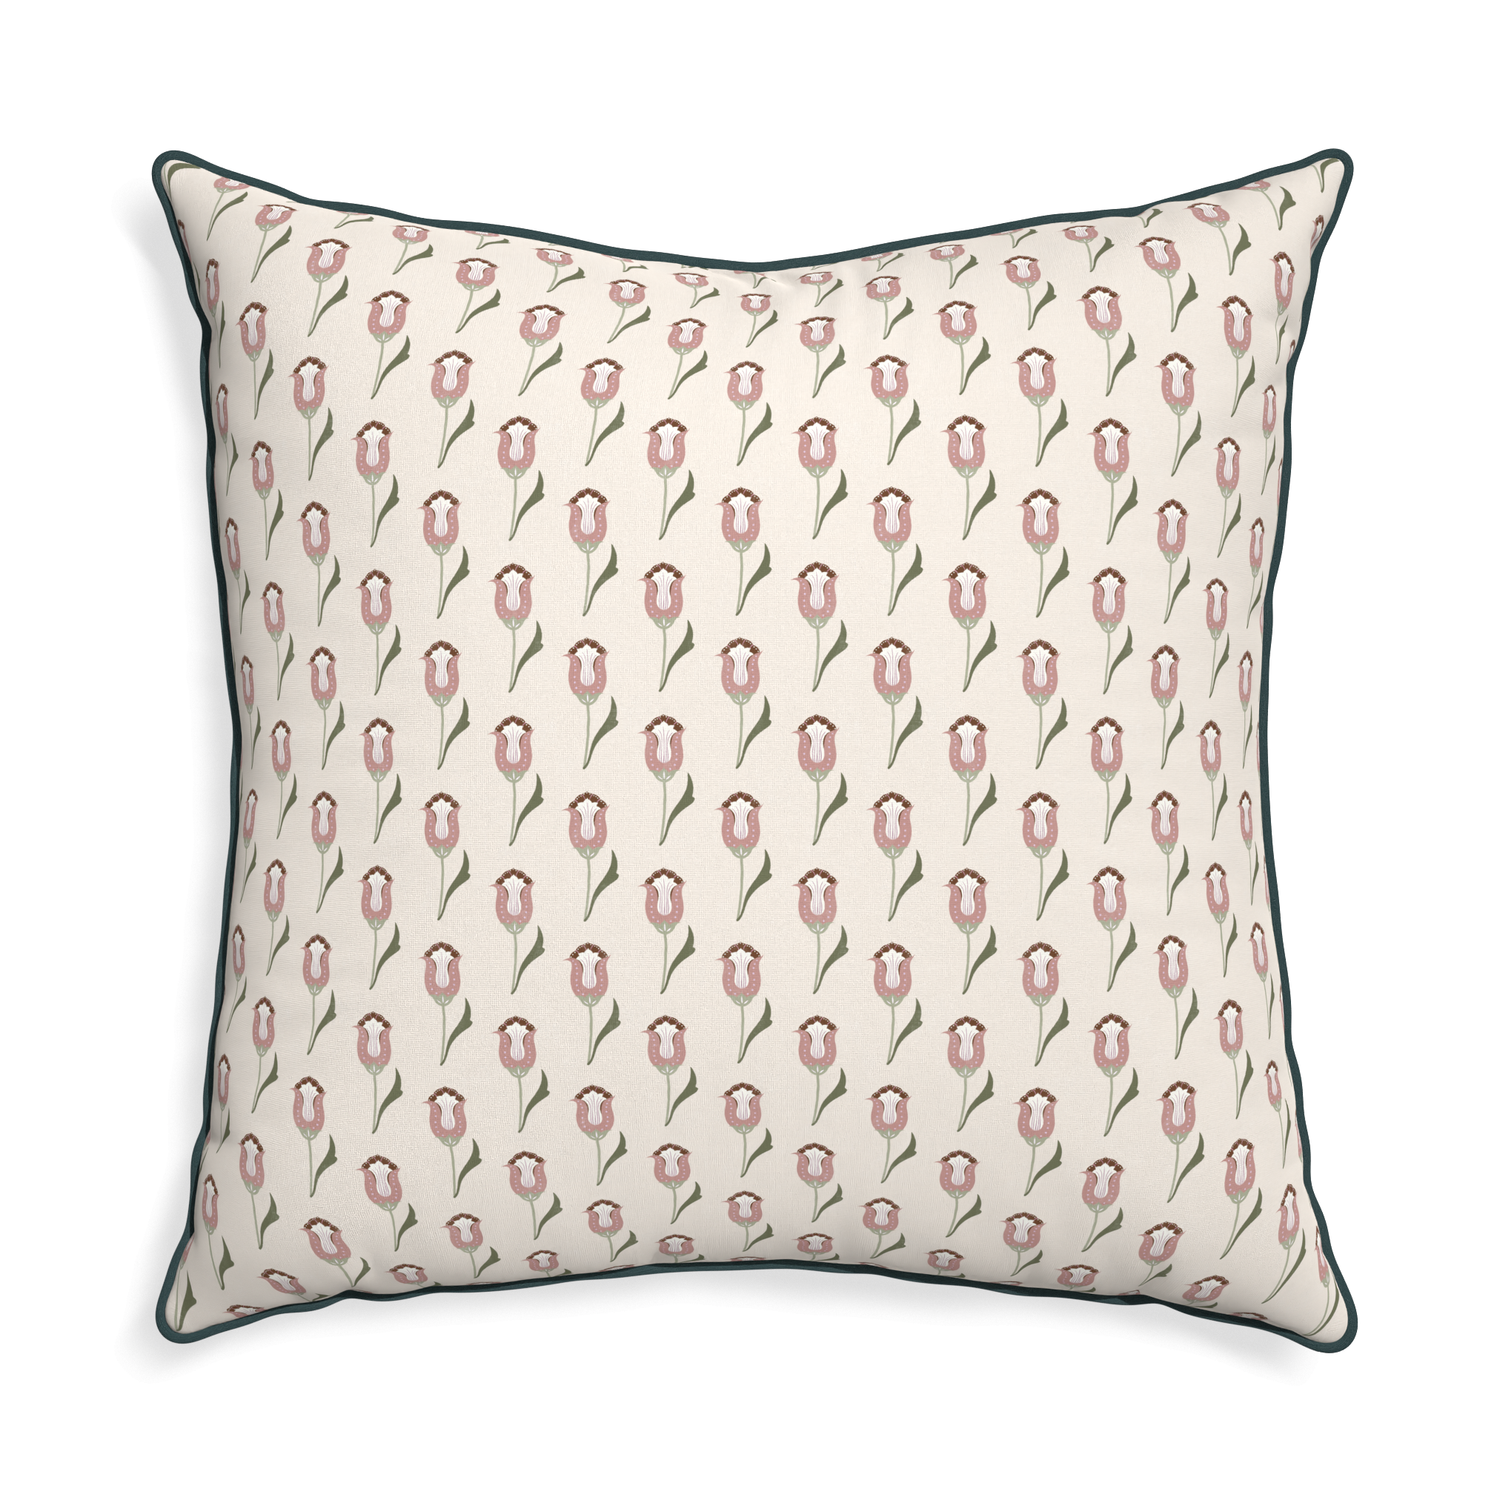 Euro-sham annabelle orchid custom pink tulippillow with p piping on white background